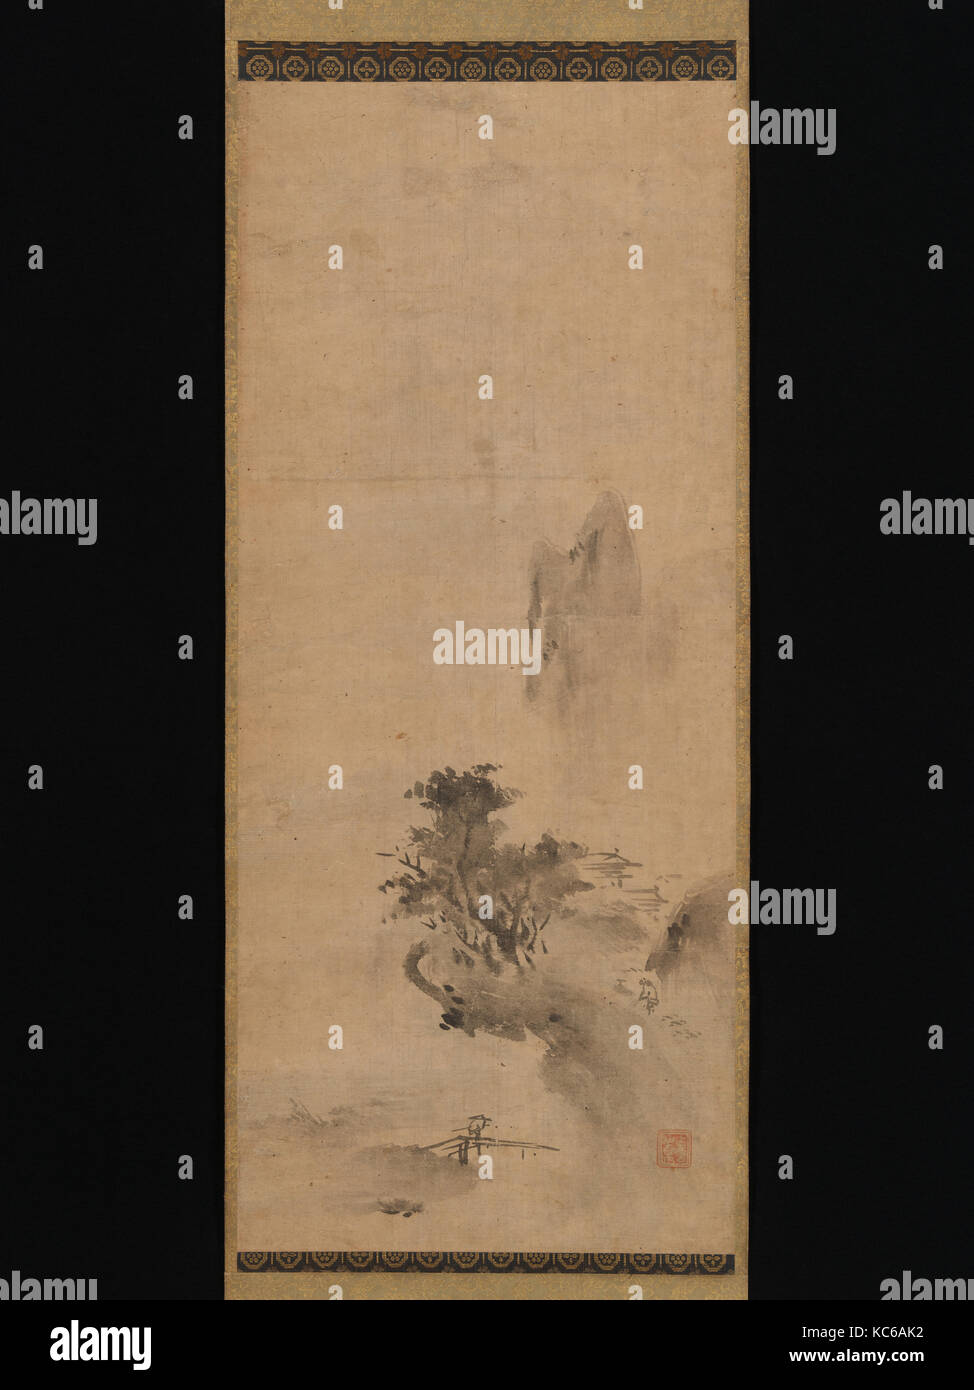 Splashed-Ink Landscape, 破墨山水図, Muromachi period (1392–1573), early 16th century, Japan, Hanging scroll; ink on paper, Image: 31 Stock Photo